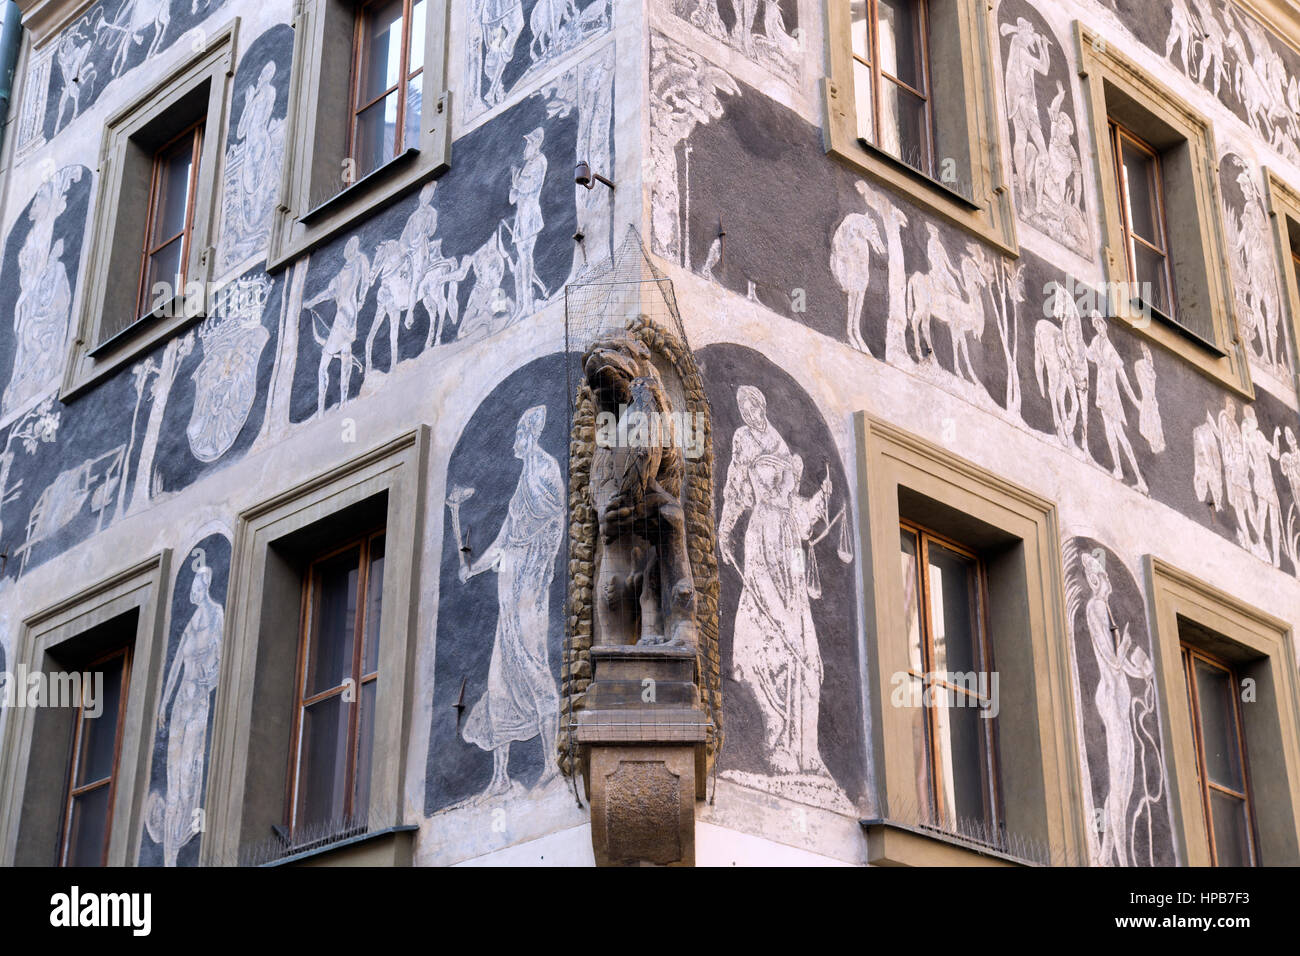 Dum u Minuty (The House at the Minute) home to Franz Kafka in Old Town in  Prague Czech Republic Stock Photo - Alamy